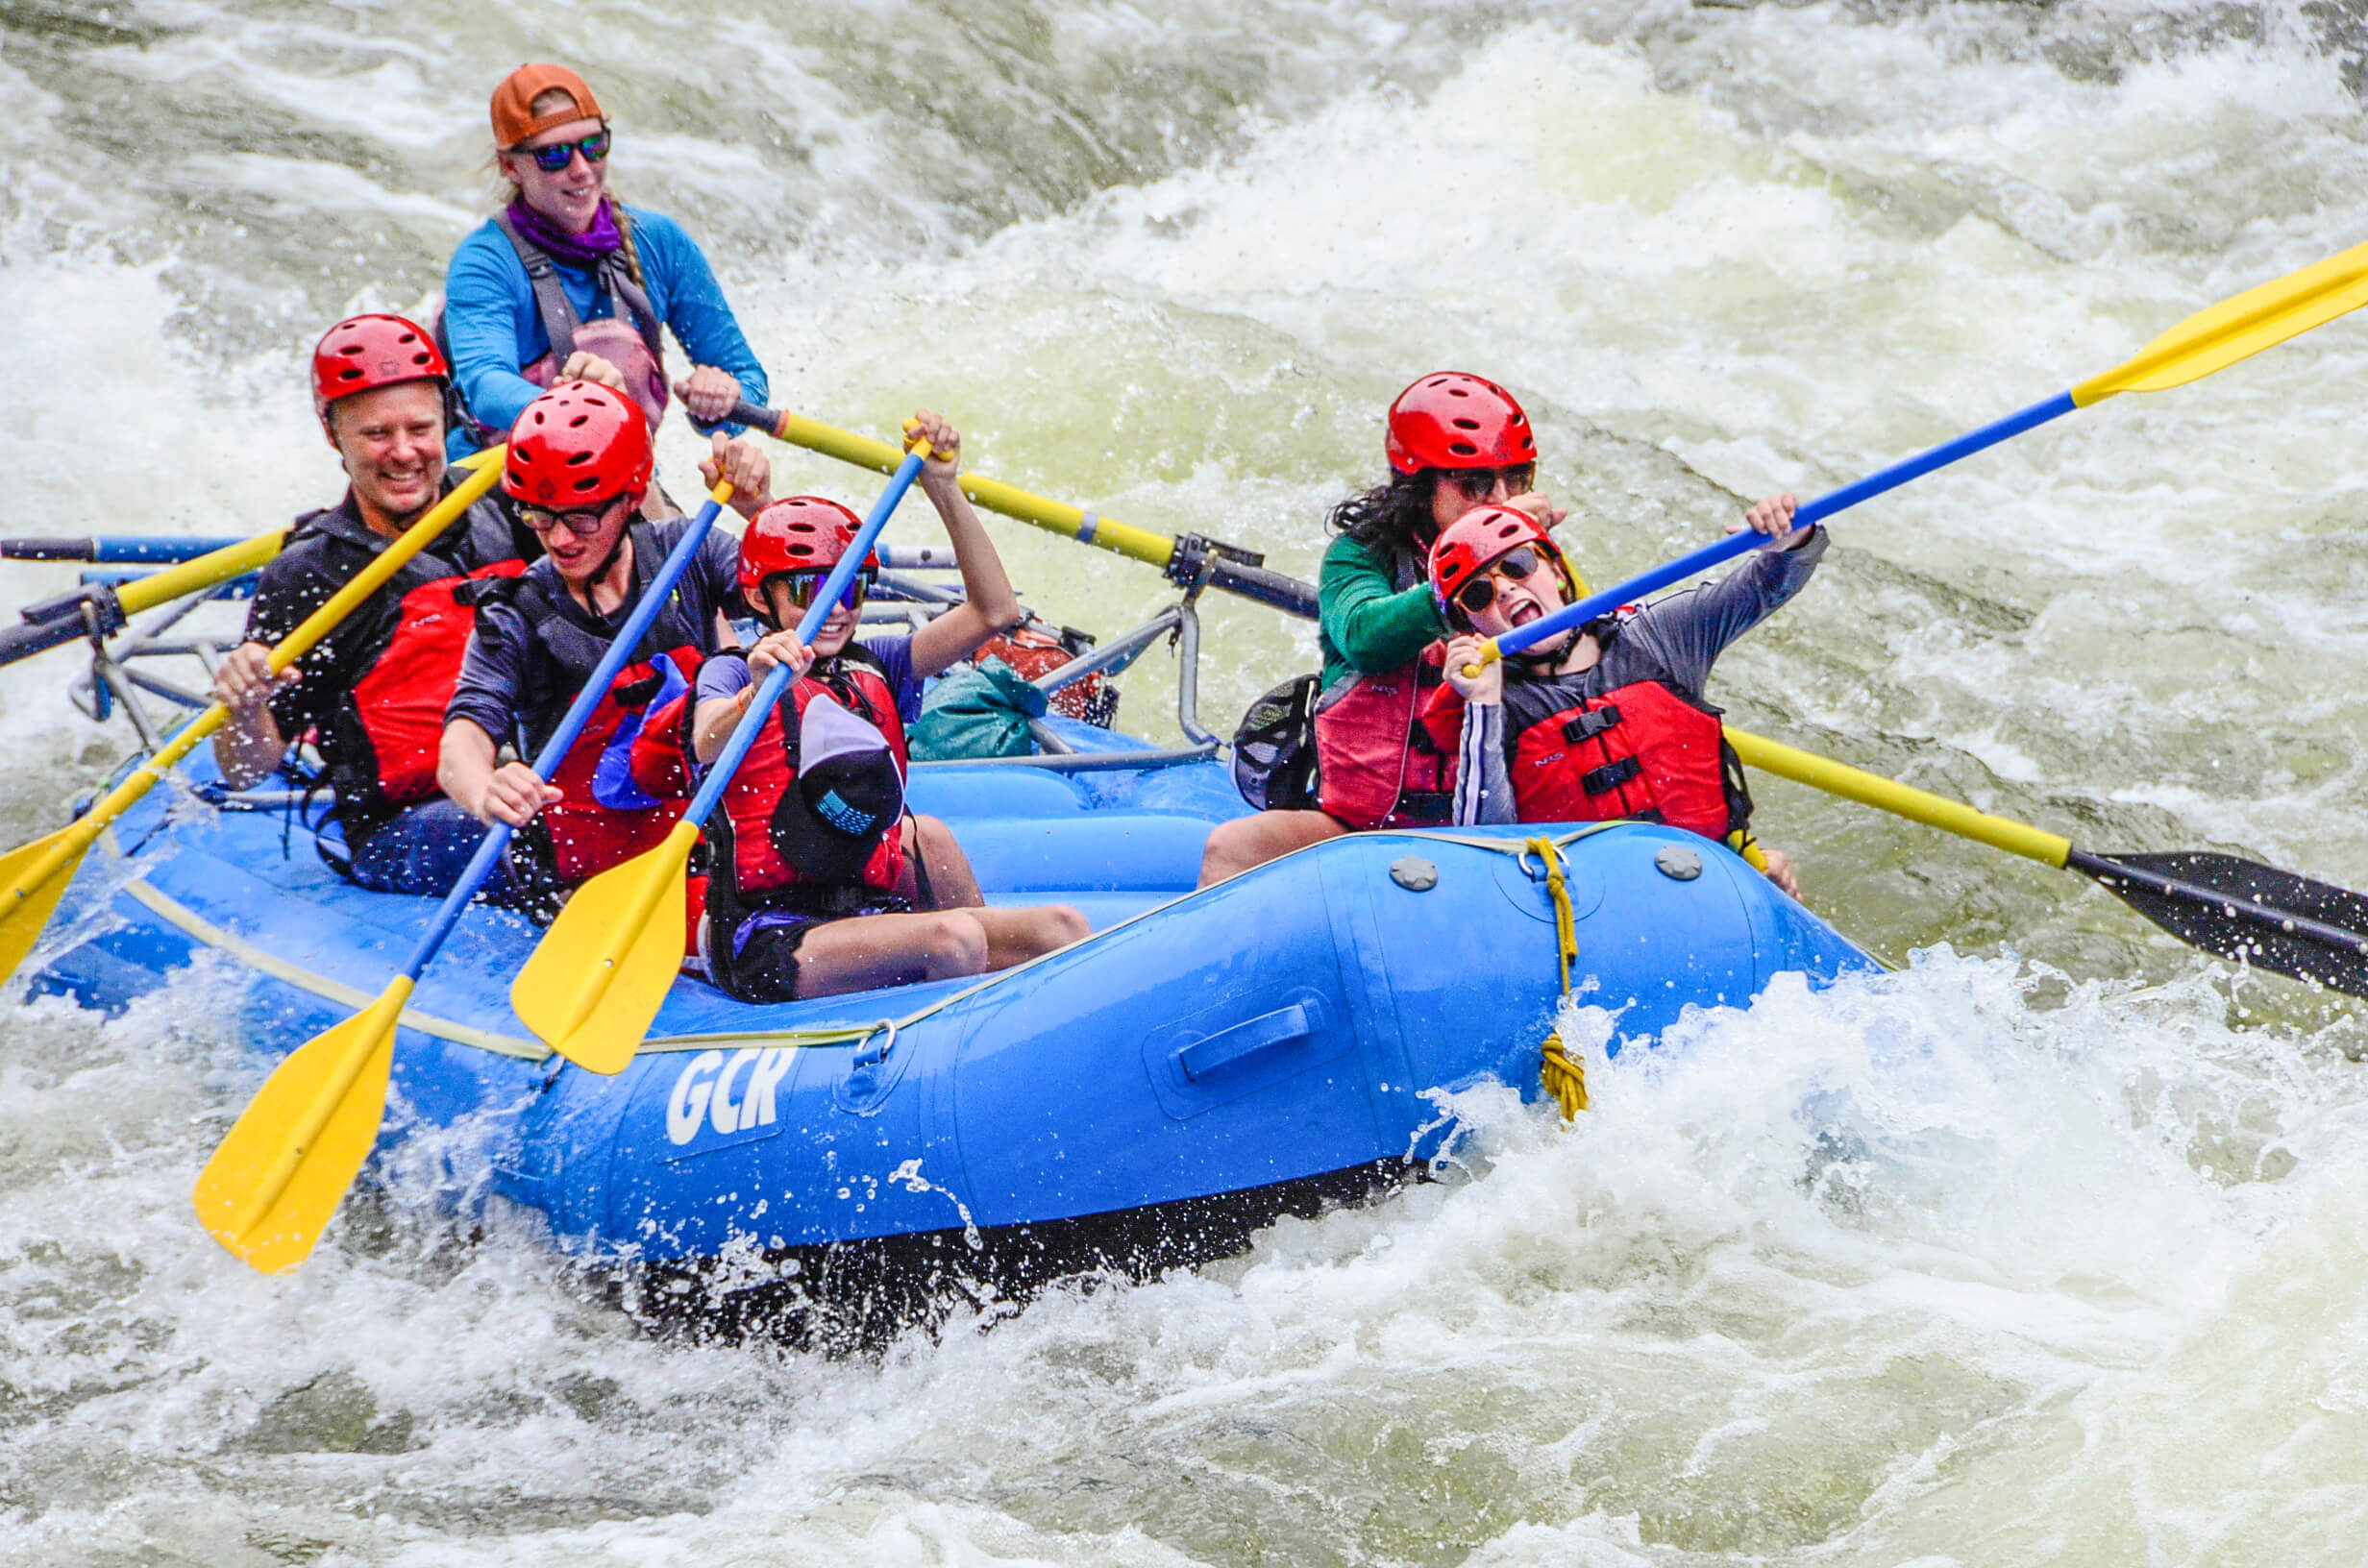 Image of a family with two young girls paddle through a set of rapids- the girls express excitement and joy as they celebrate with their smiles.